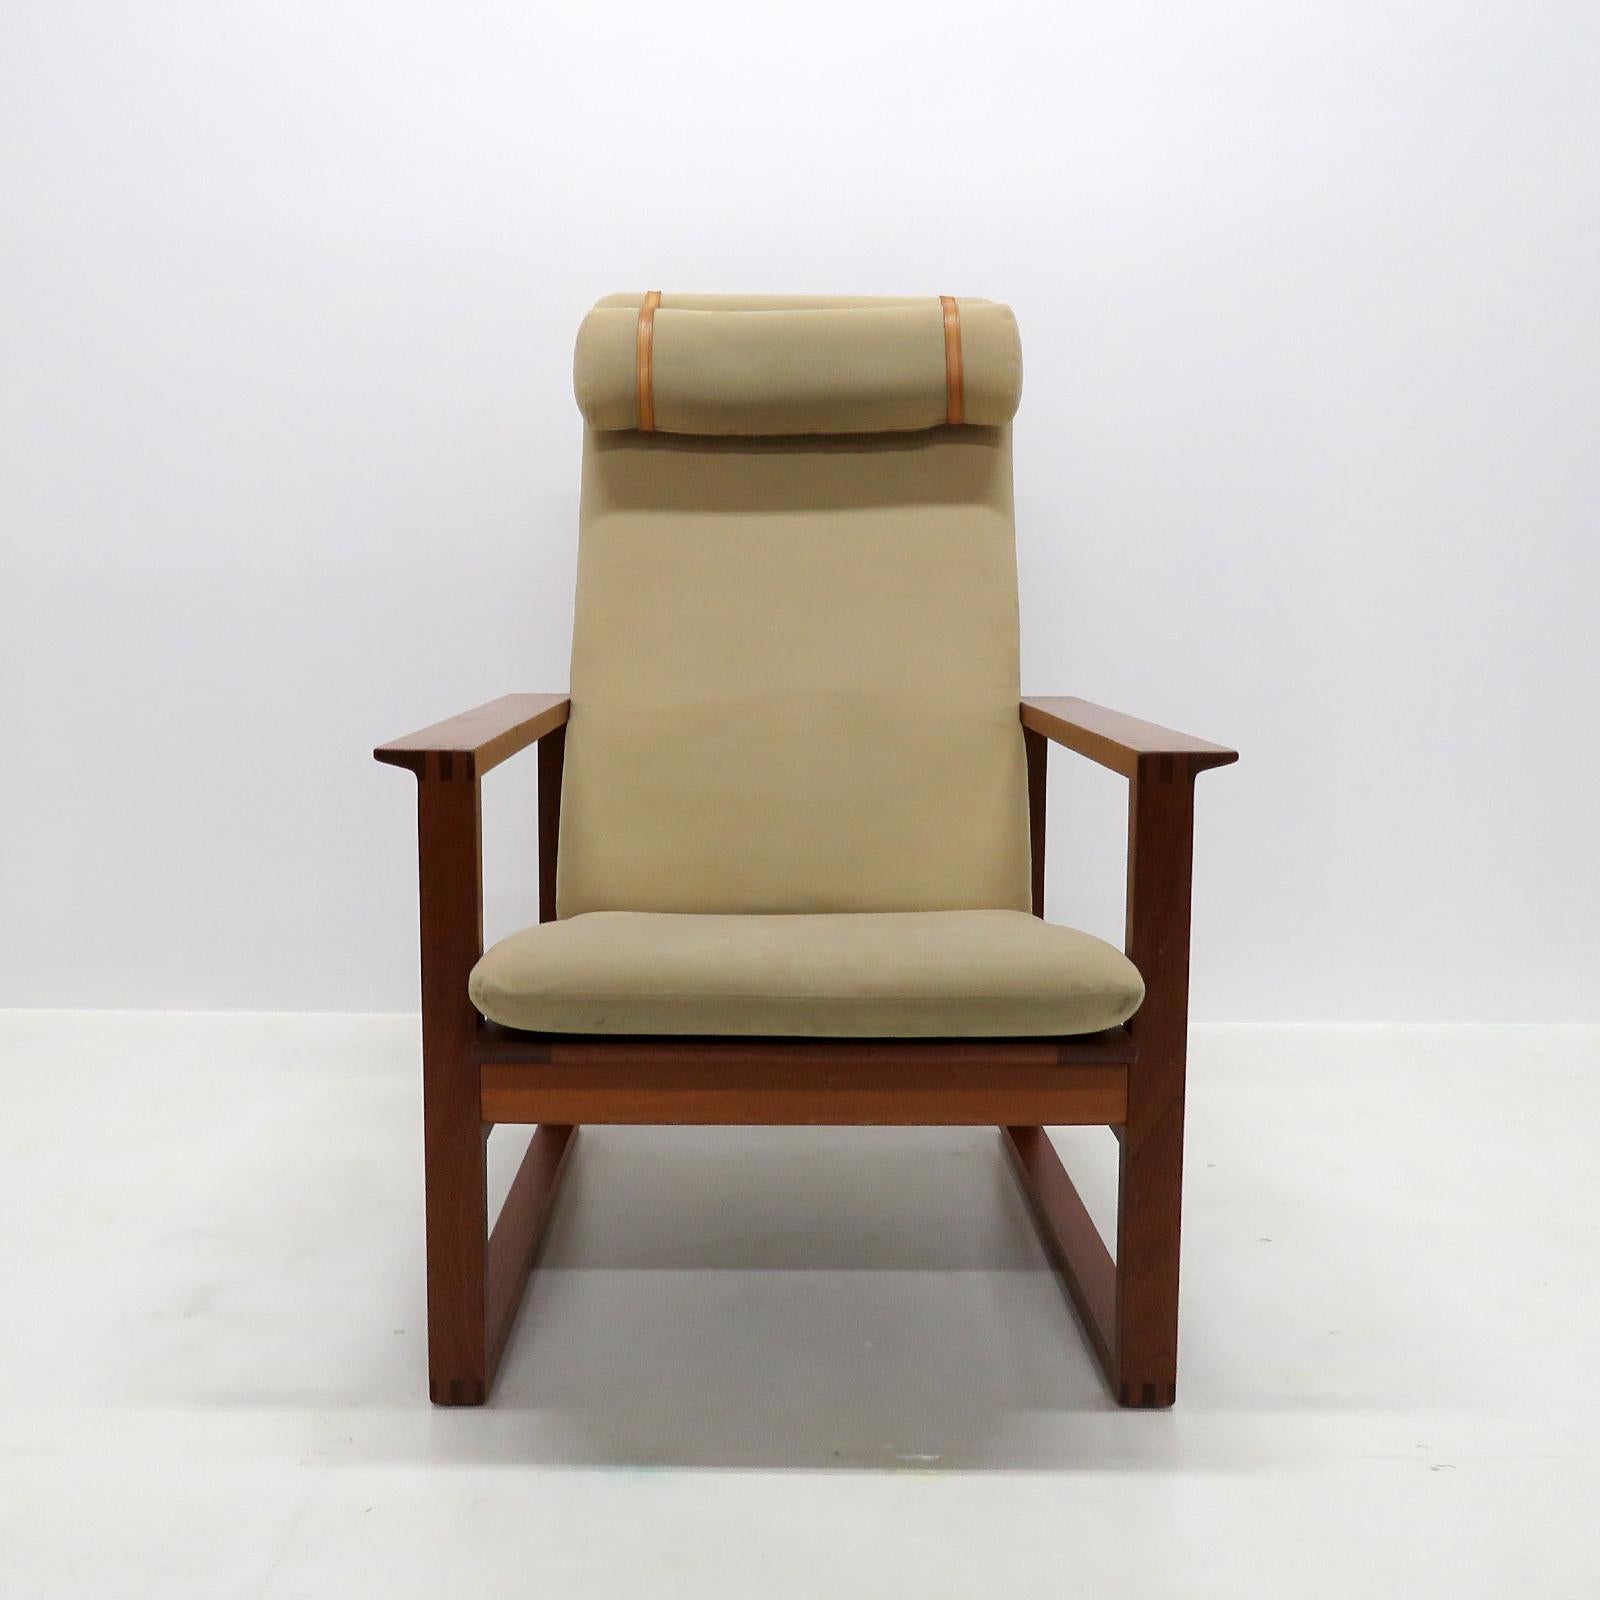 Stunning lounge chair 'BM-2254/ Slædestolen' designed by Børge Mogensen in 1956 and produced by Fredericia Stolefabrik, Sweden, adjustable mahogany frame with original beige alcantara upholstery and leather straps for the seat cushion and headrest.